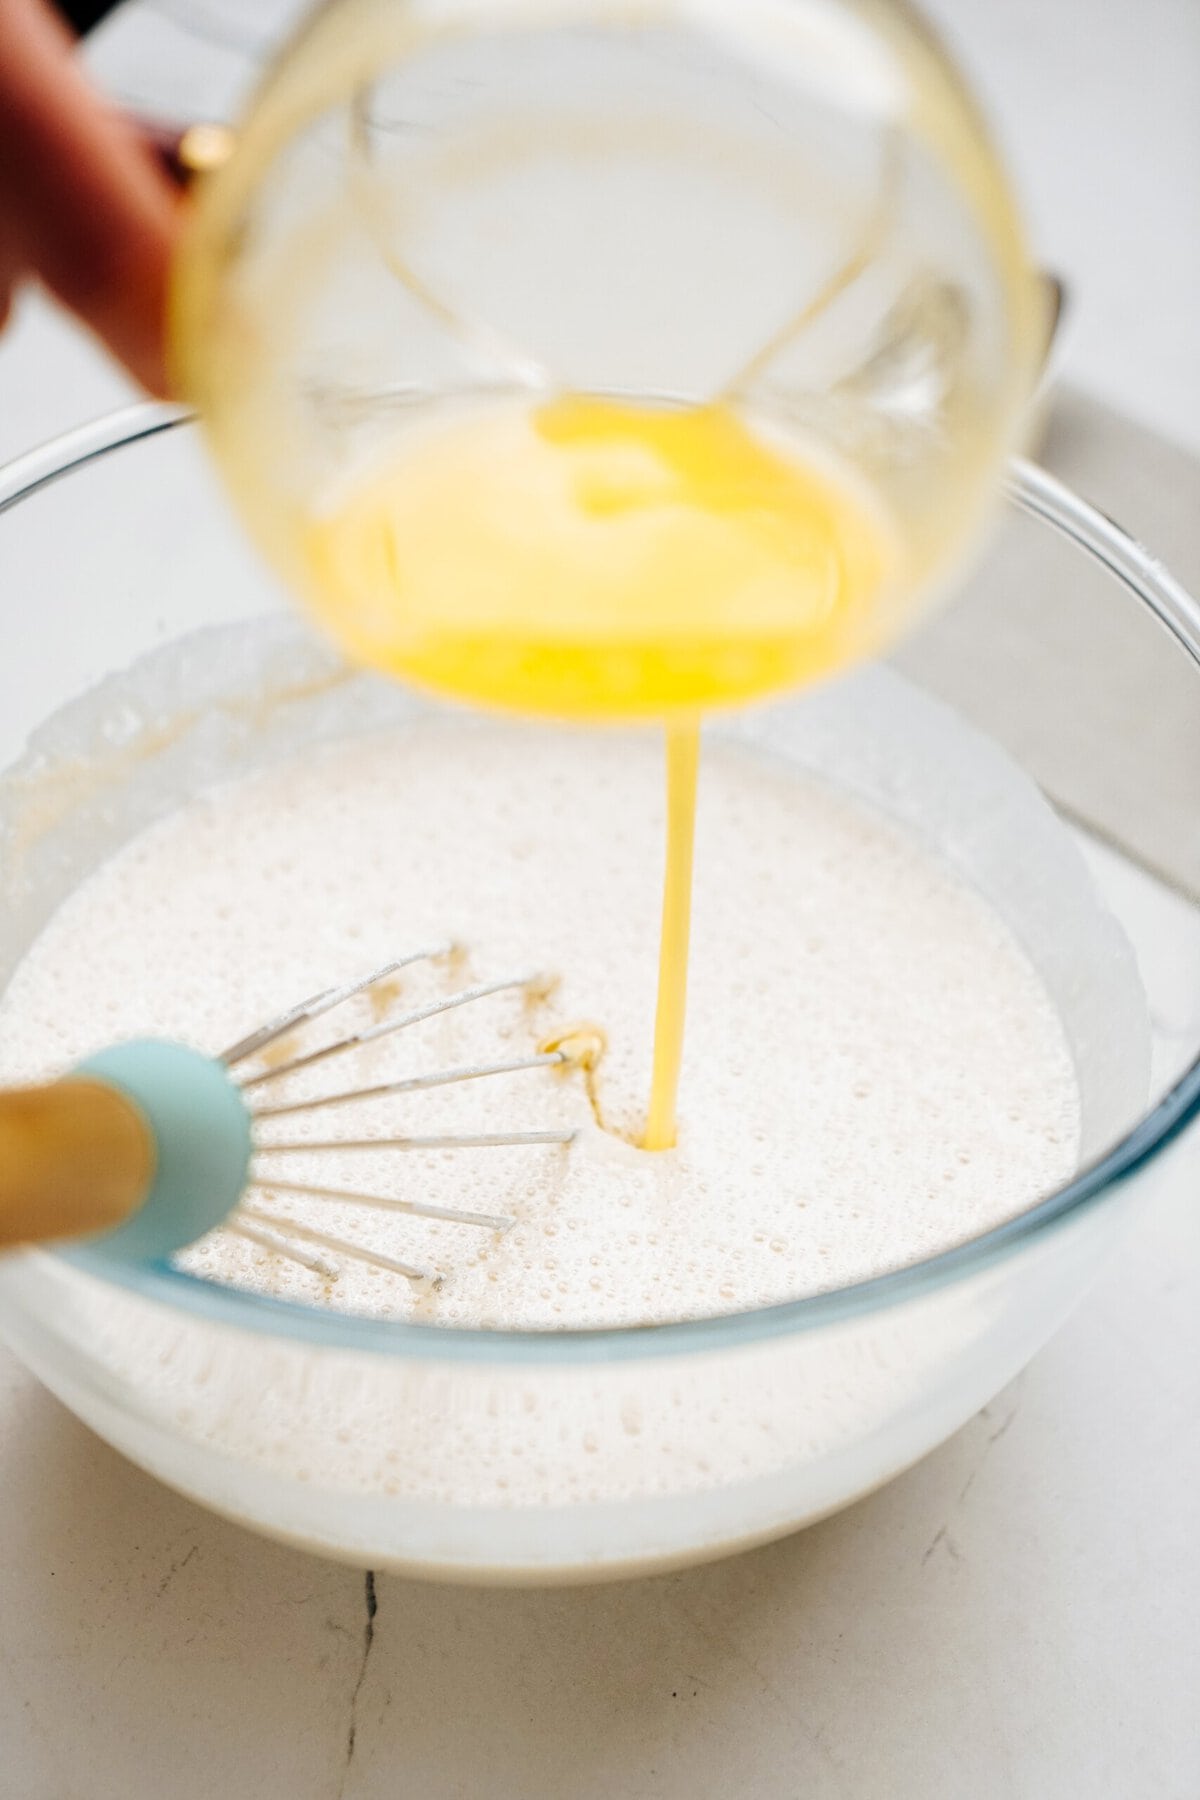 A hand pours a yellow liquid, likely melted butter, into a mixing bowl containing a foamy, white mixture, with a whisk placed inside the bowl.